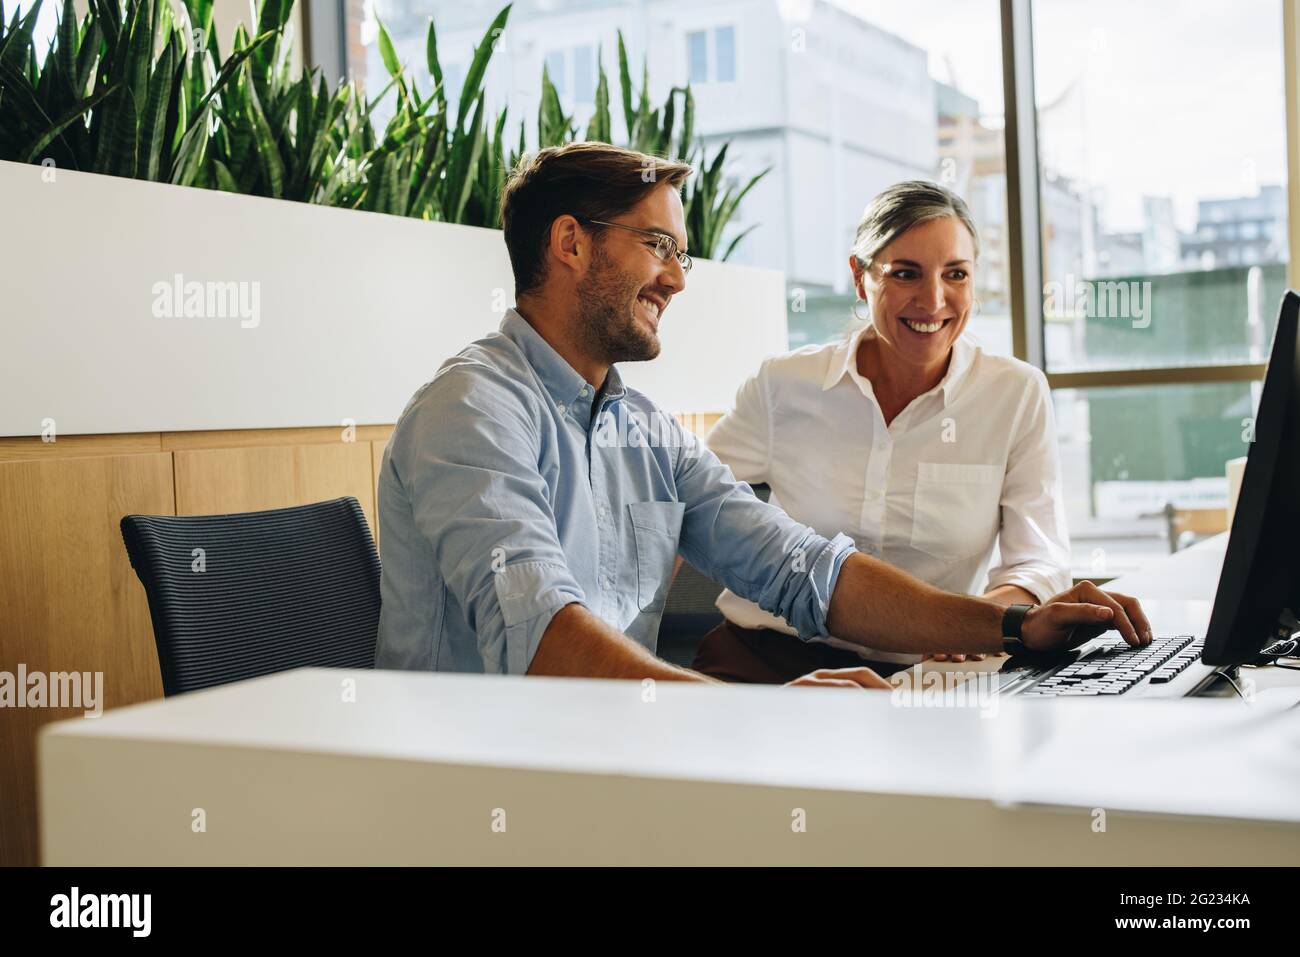 Manager helping coworker with some work in office. Happy mid adult female working with young male colleague. Stock Photo